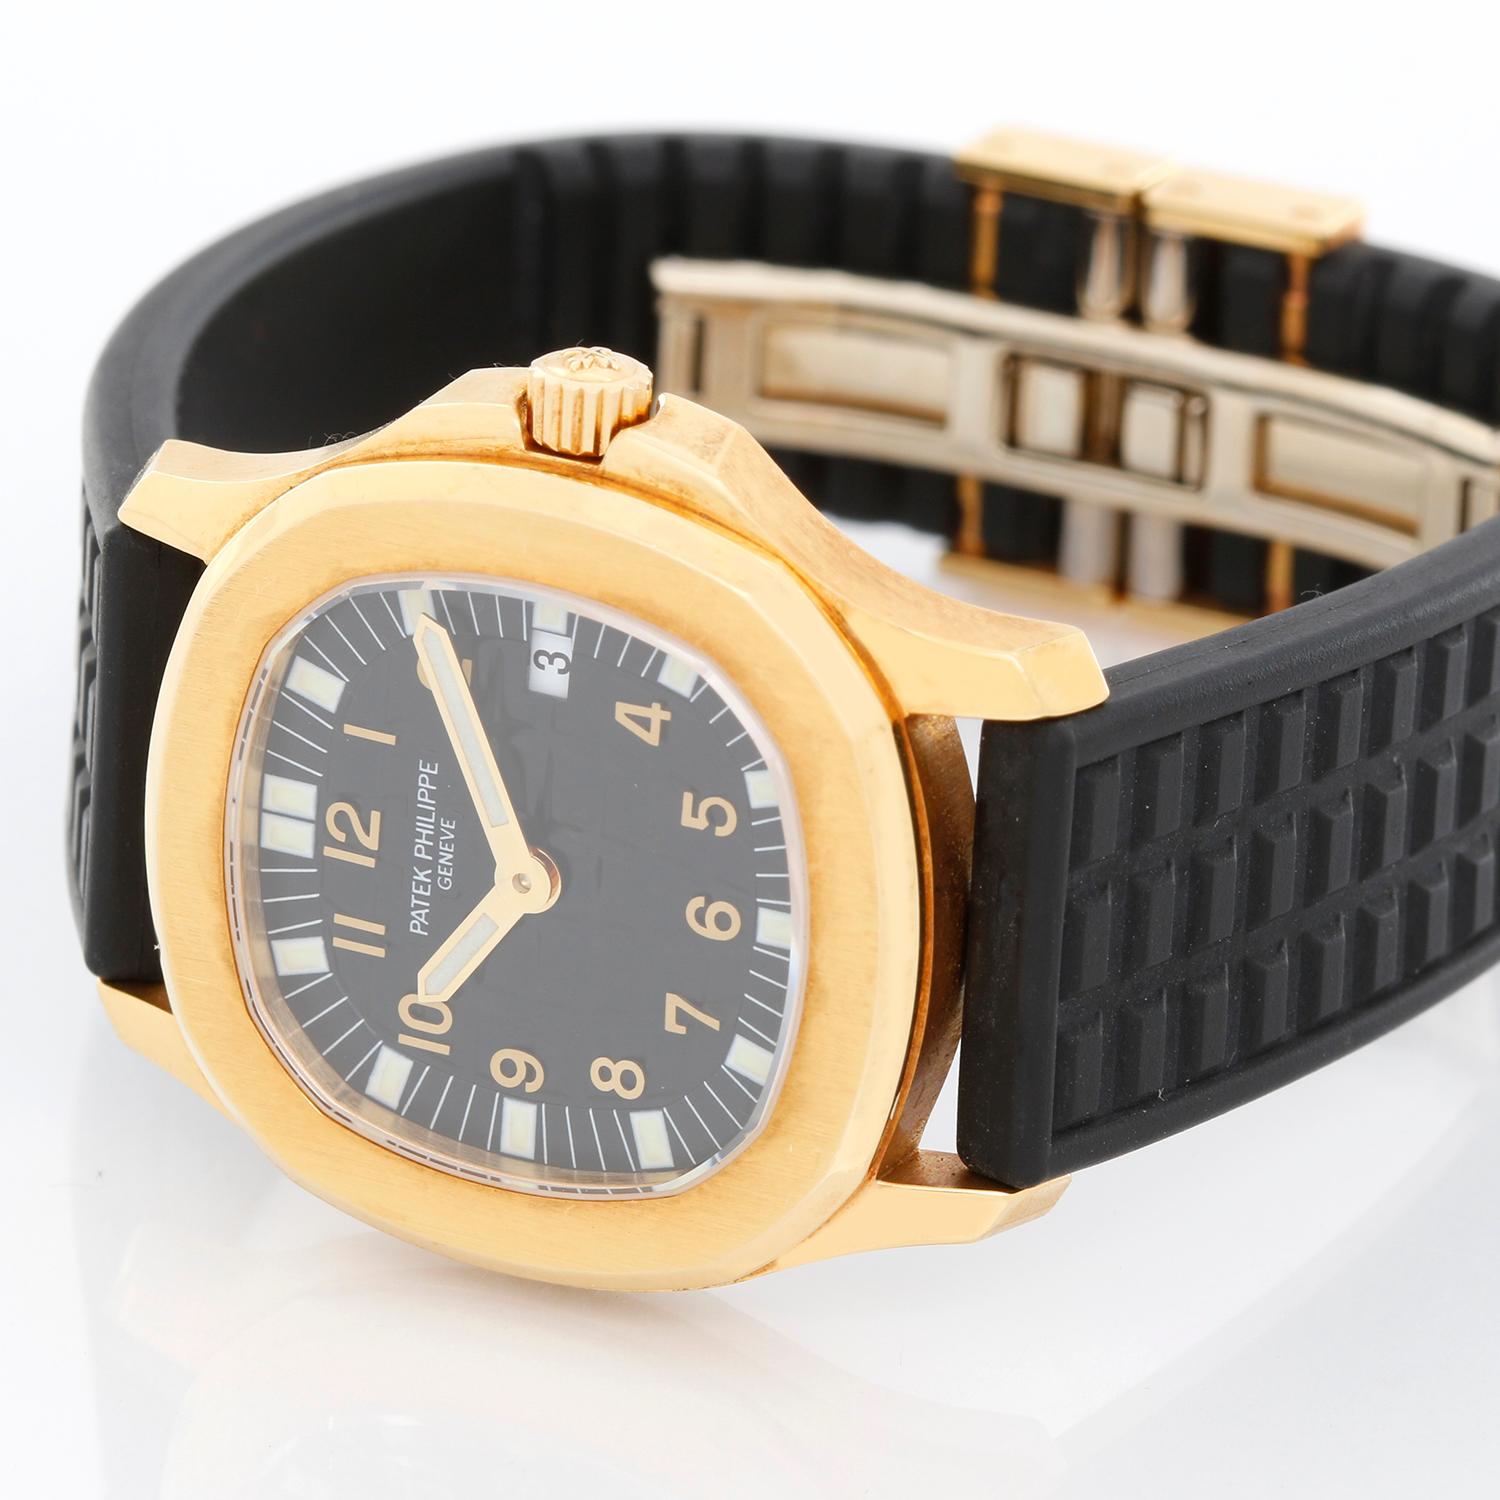 Patek Philippe Aquanaut 18K Yellow Gold Watch 4960 J - Quartz. 18K Yellow gold ( 30 mm ). Black dial with Arabic numerals. Black rubber strap  band with 18k yellow gold Patek Philippe deployant clasp. Pre-owned with Patek Philippe box and books.